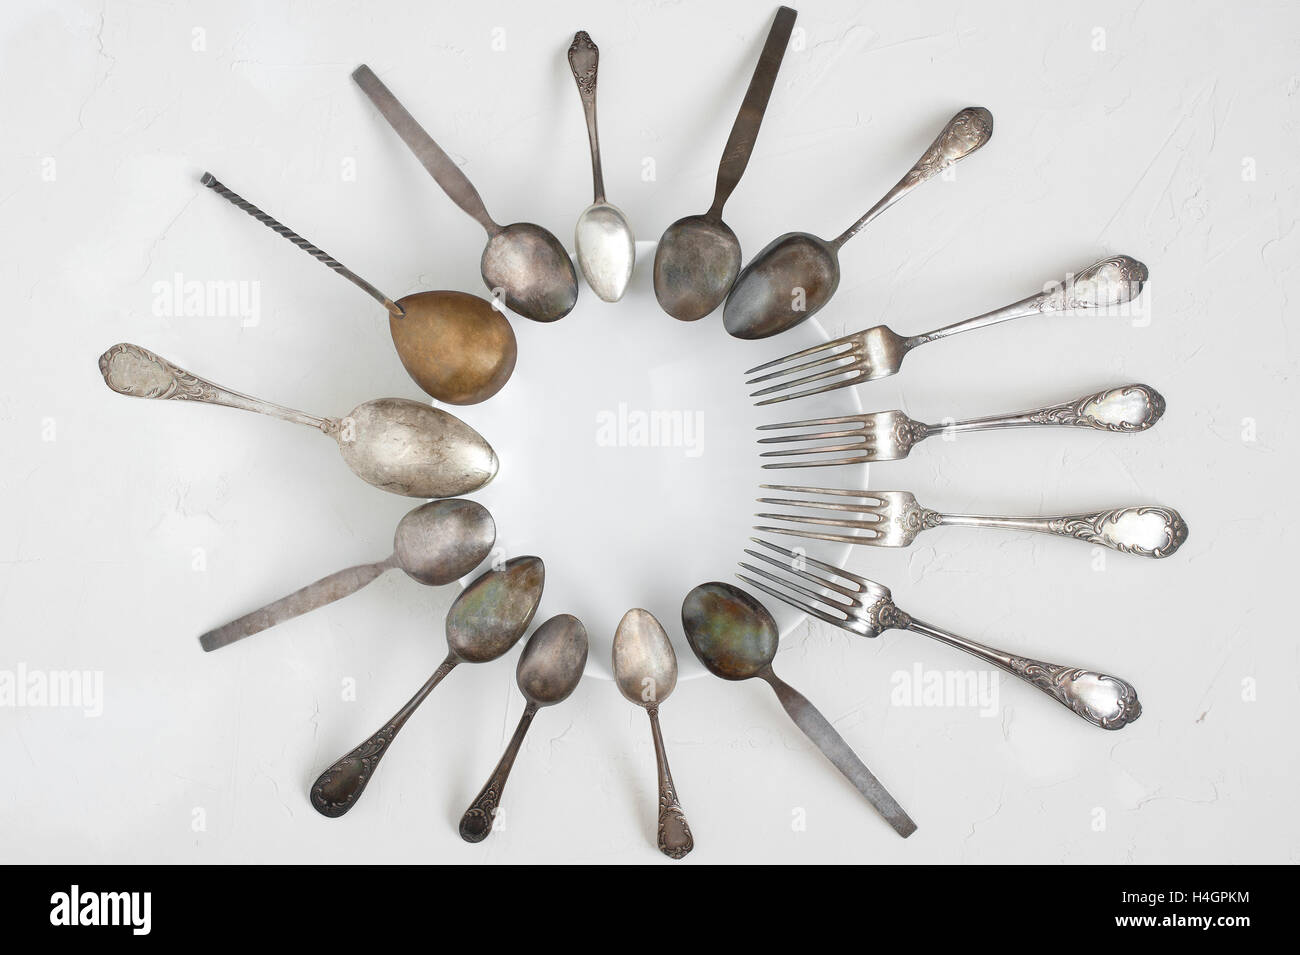 Silverware on the white plate Stock Photo